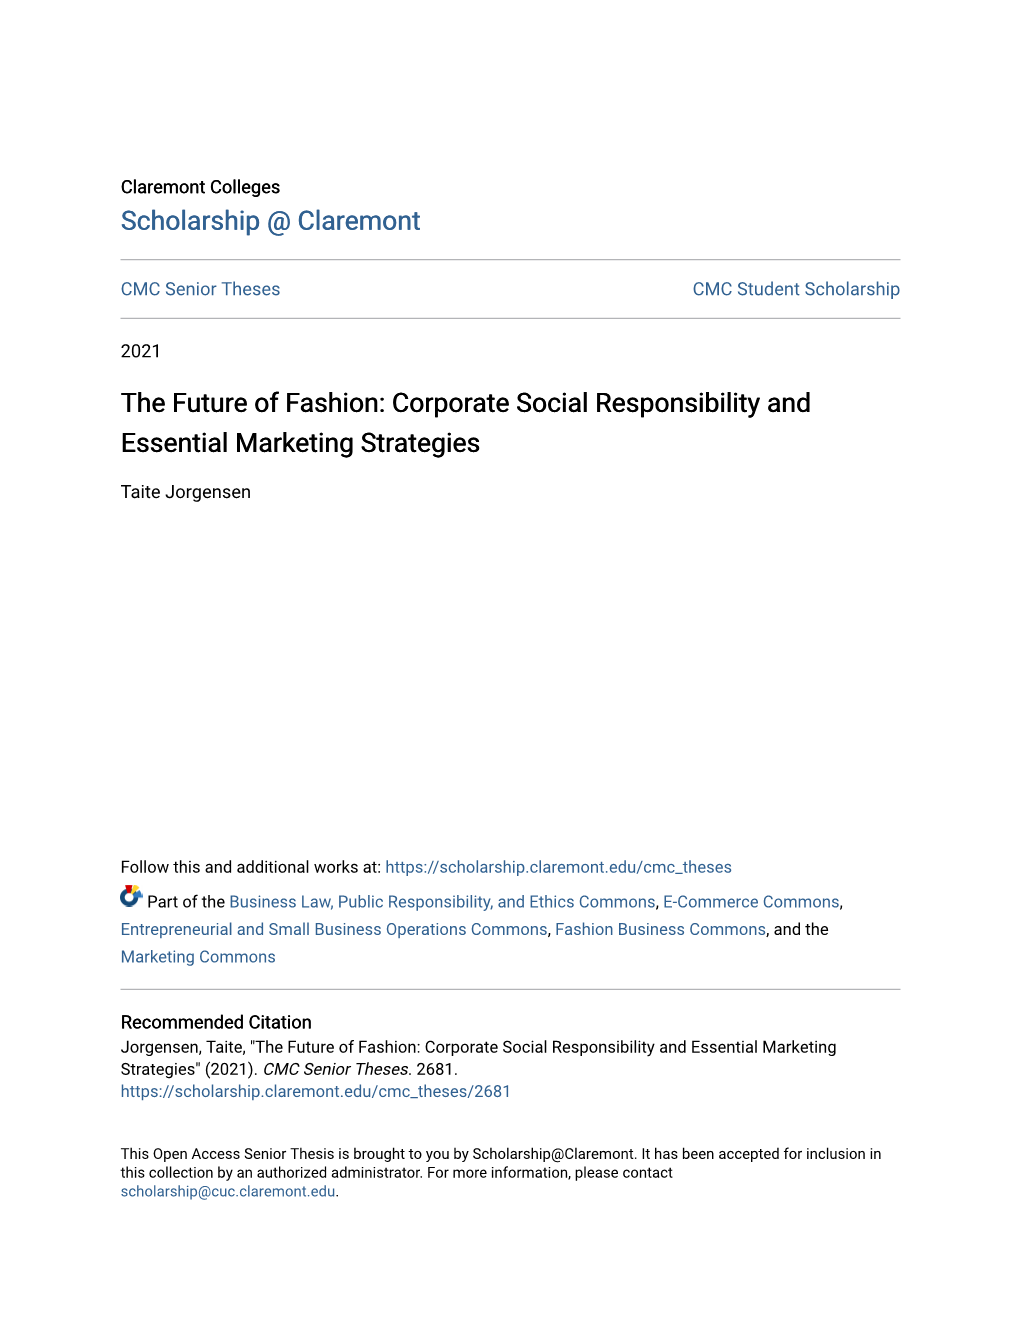 The Future of Fashion: Corporate Social Responsibility and Essential Marketing Strategies